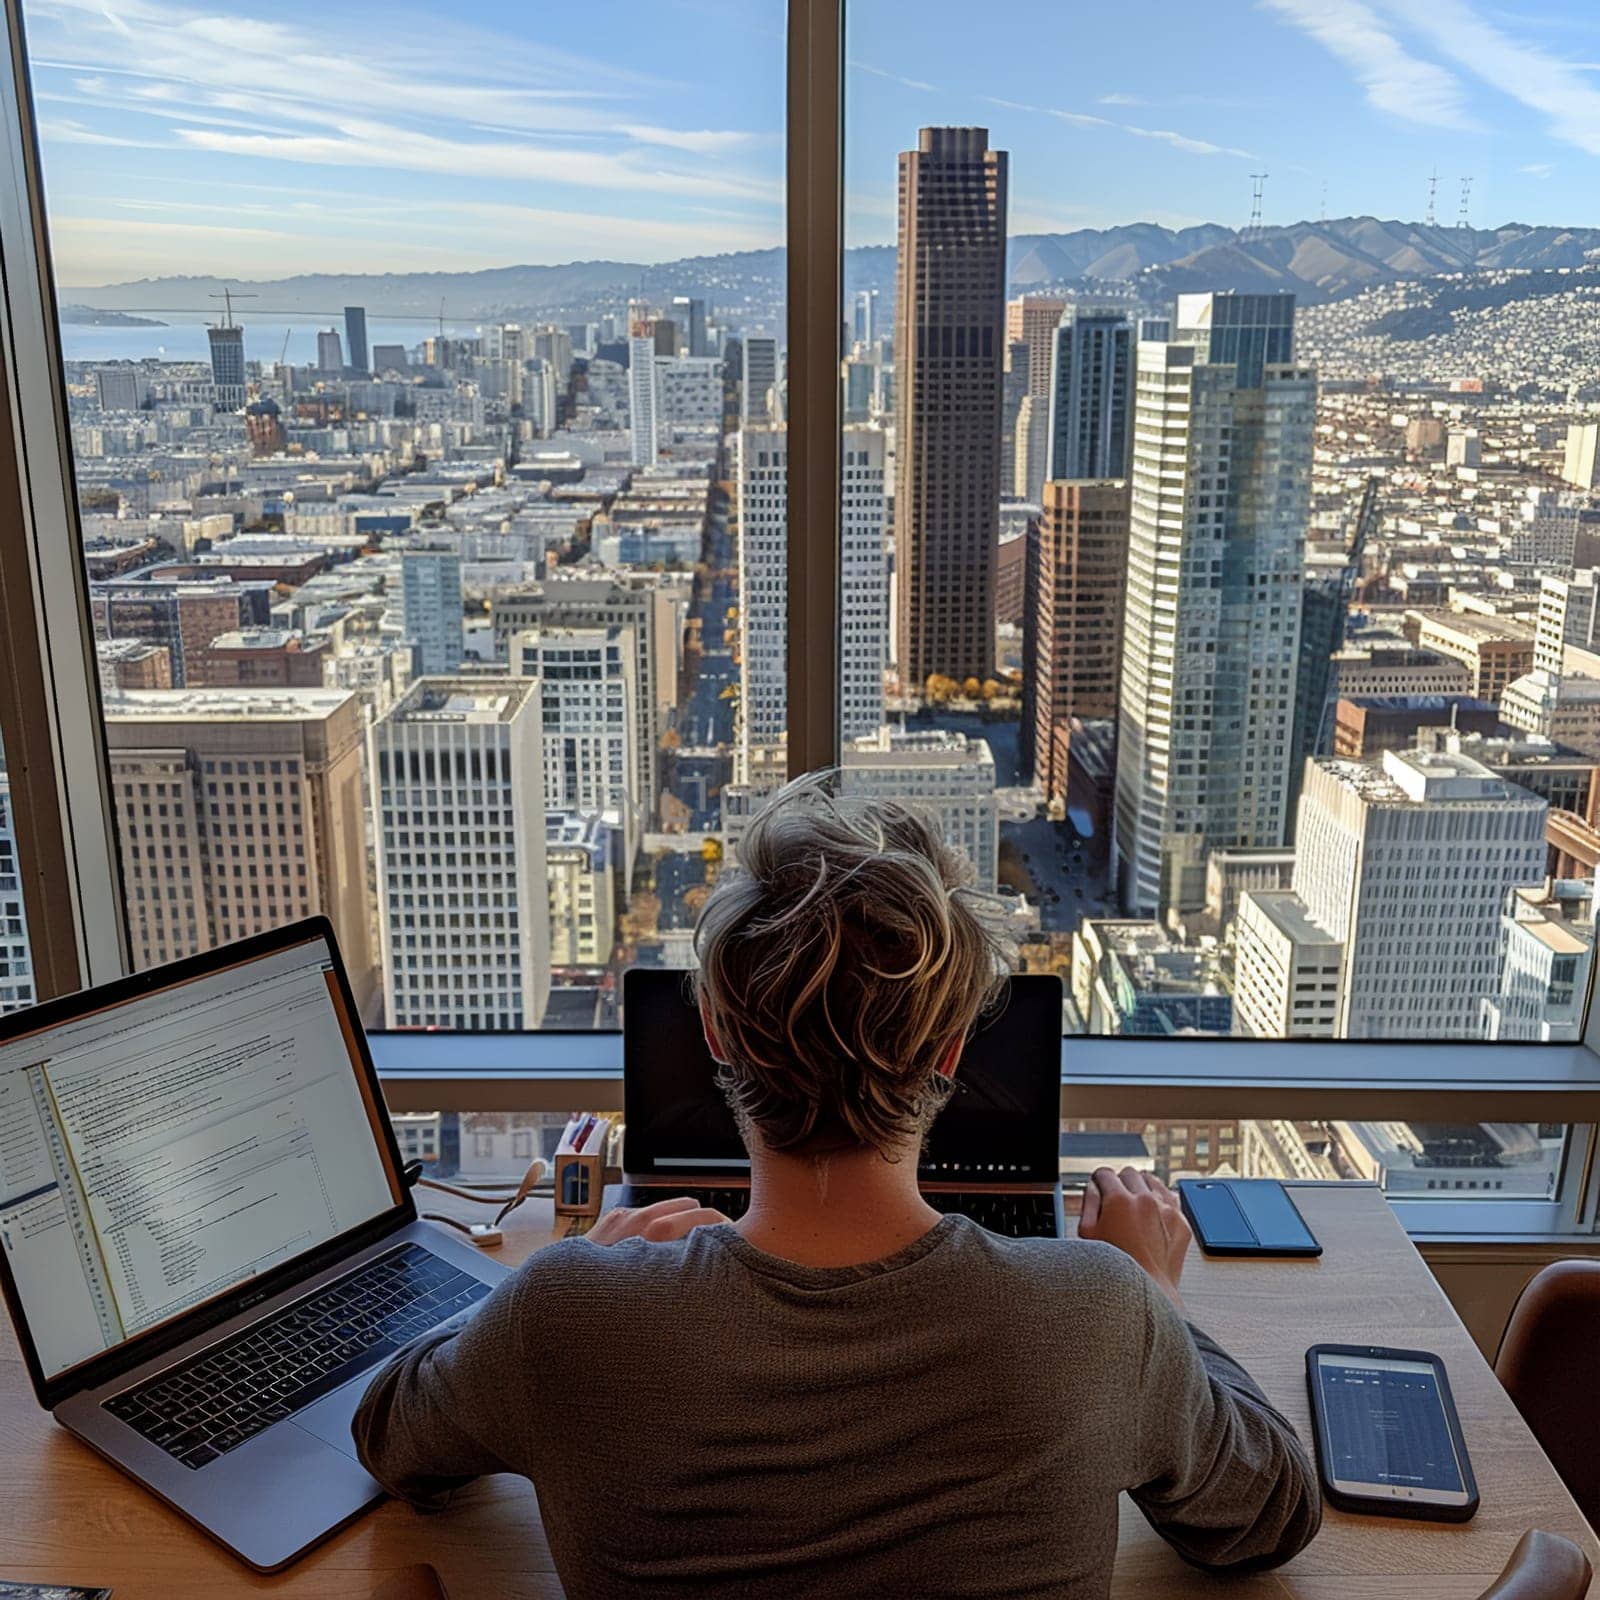 Dedicated Programmer Developing Software in Silicon Valley, A tech wizard codes away in a casual office with iconic tech hub views.